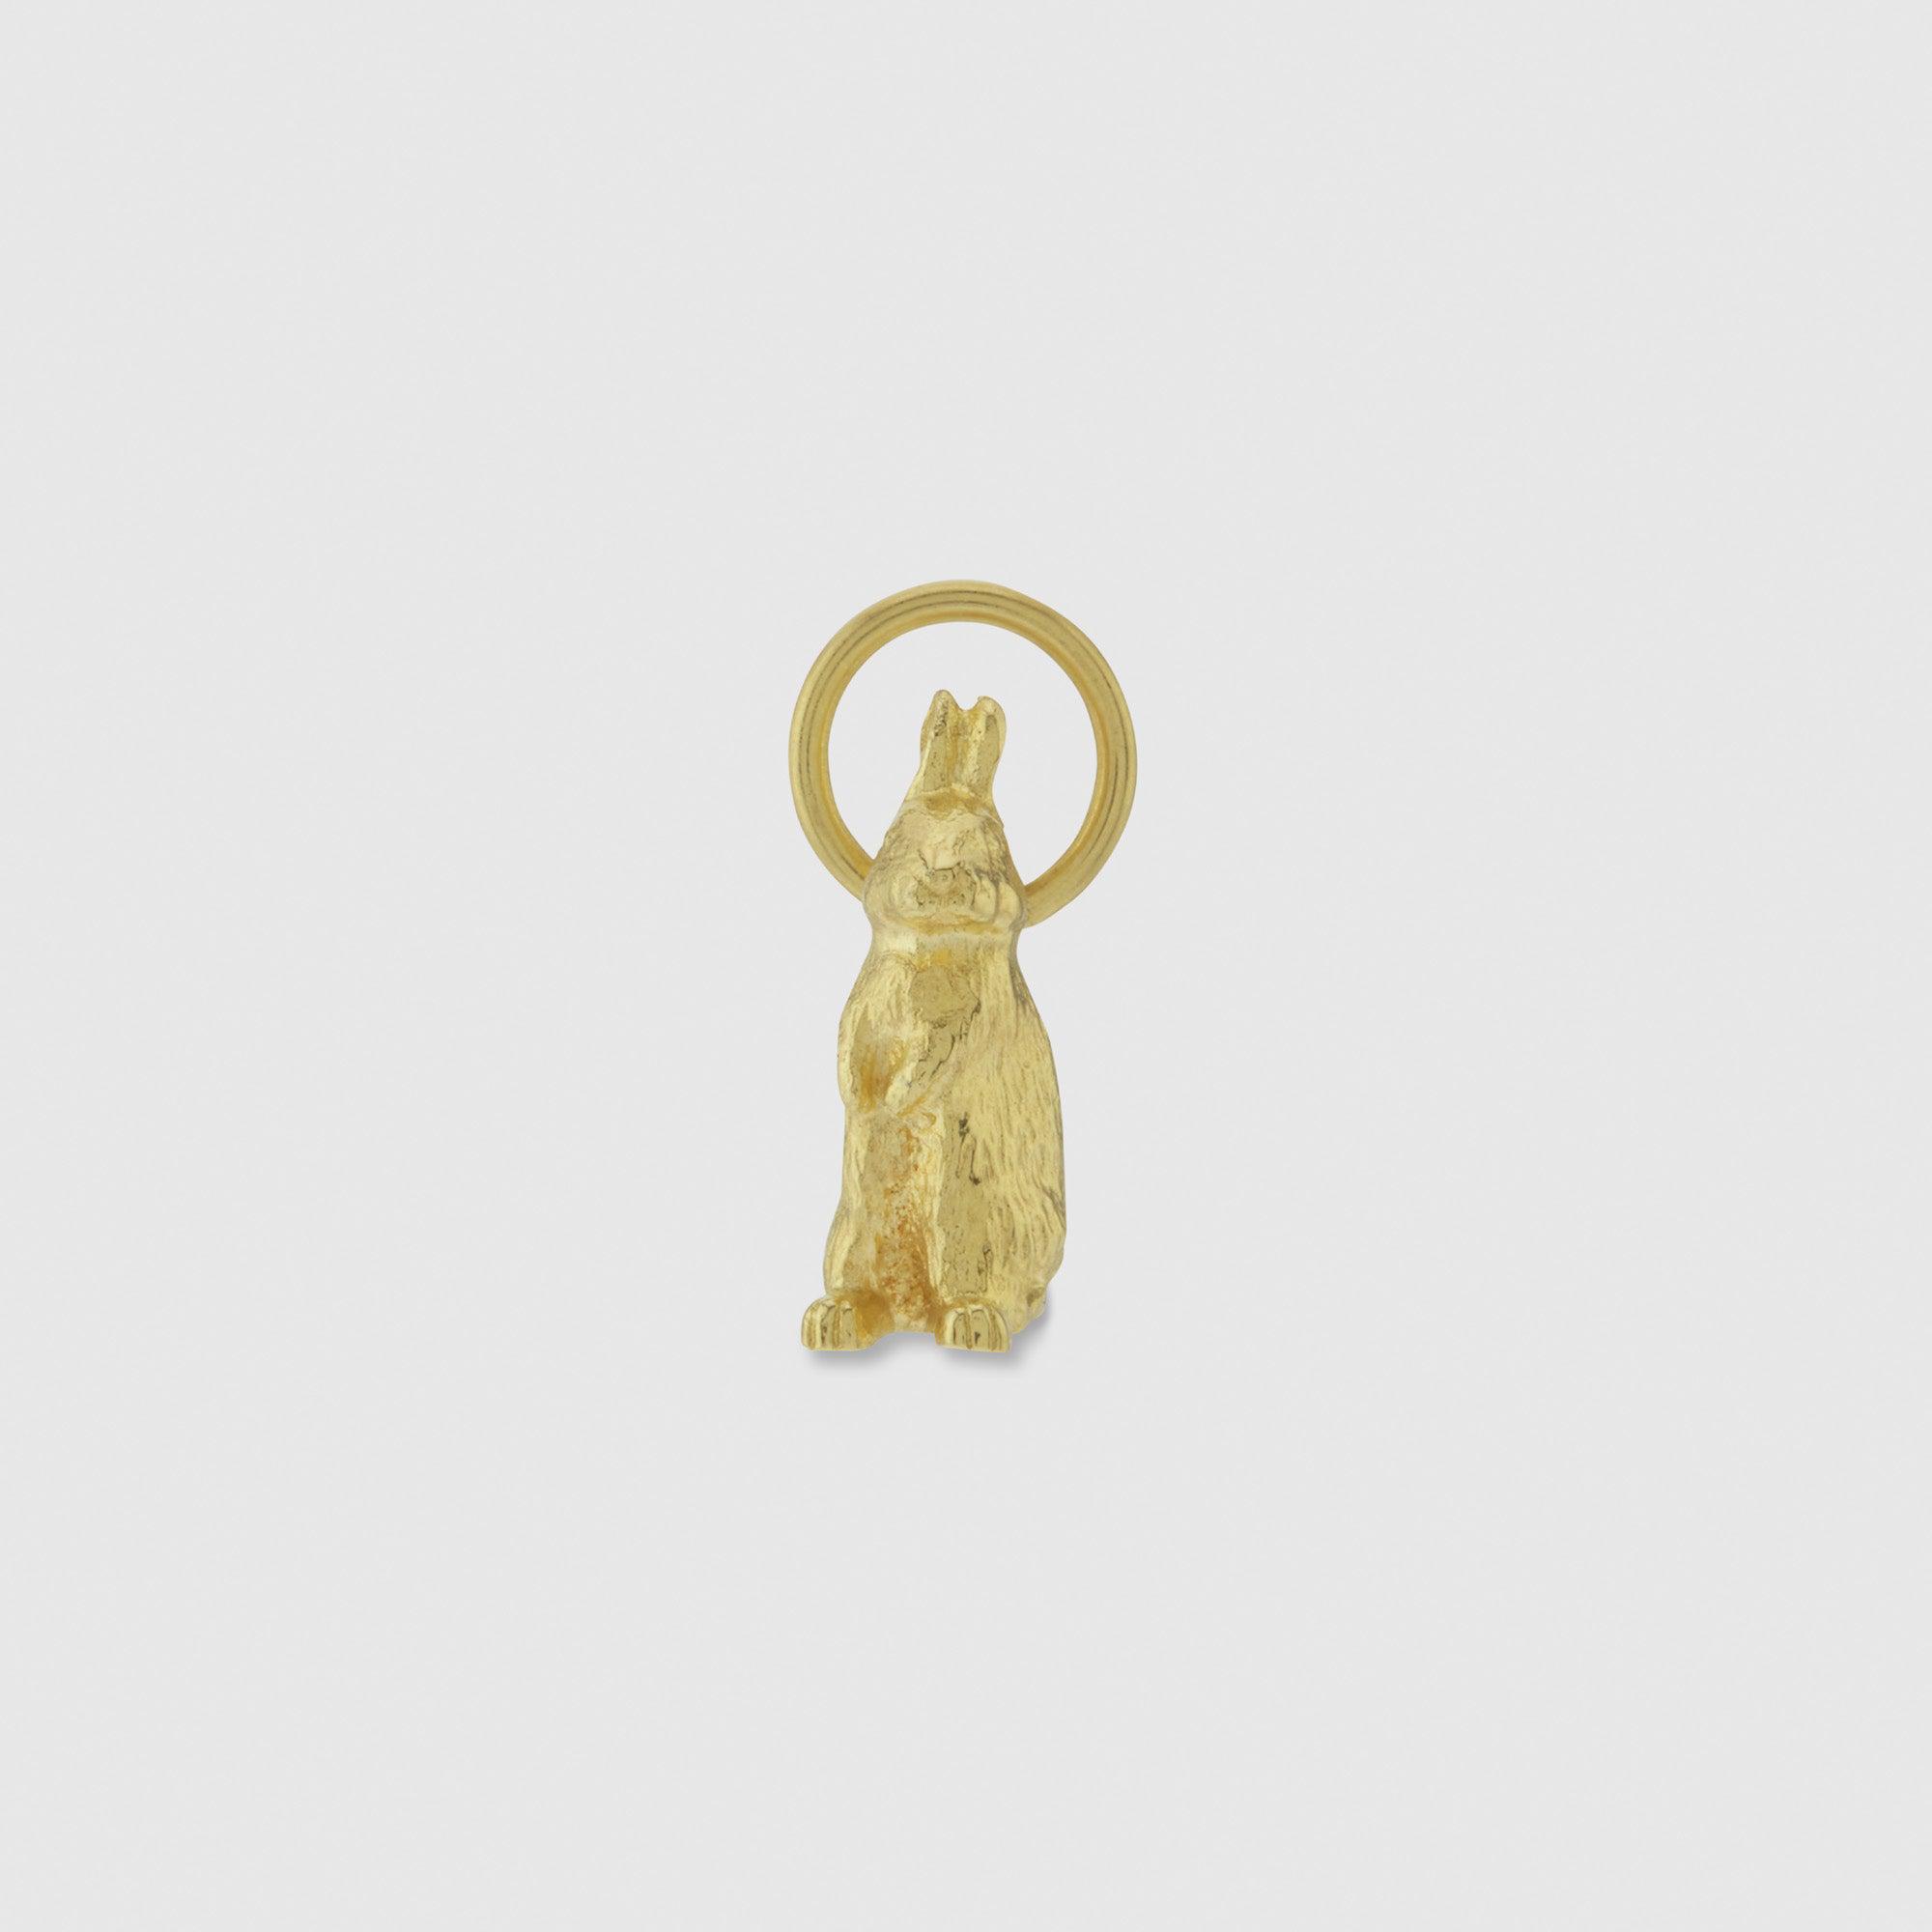 Andrew Bunney Small Standing Rabbit Charm Yellow Gold by ANDREW BUNNEY